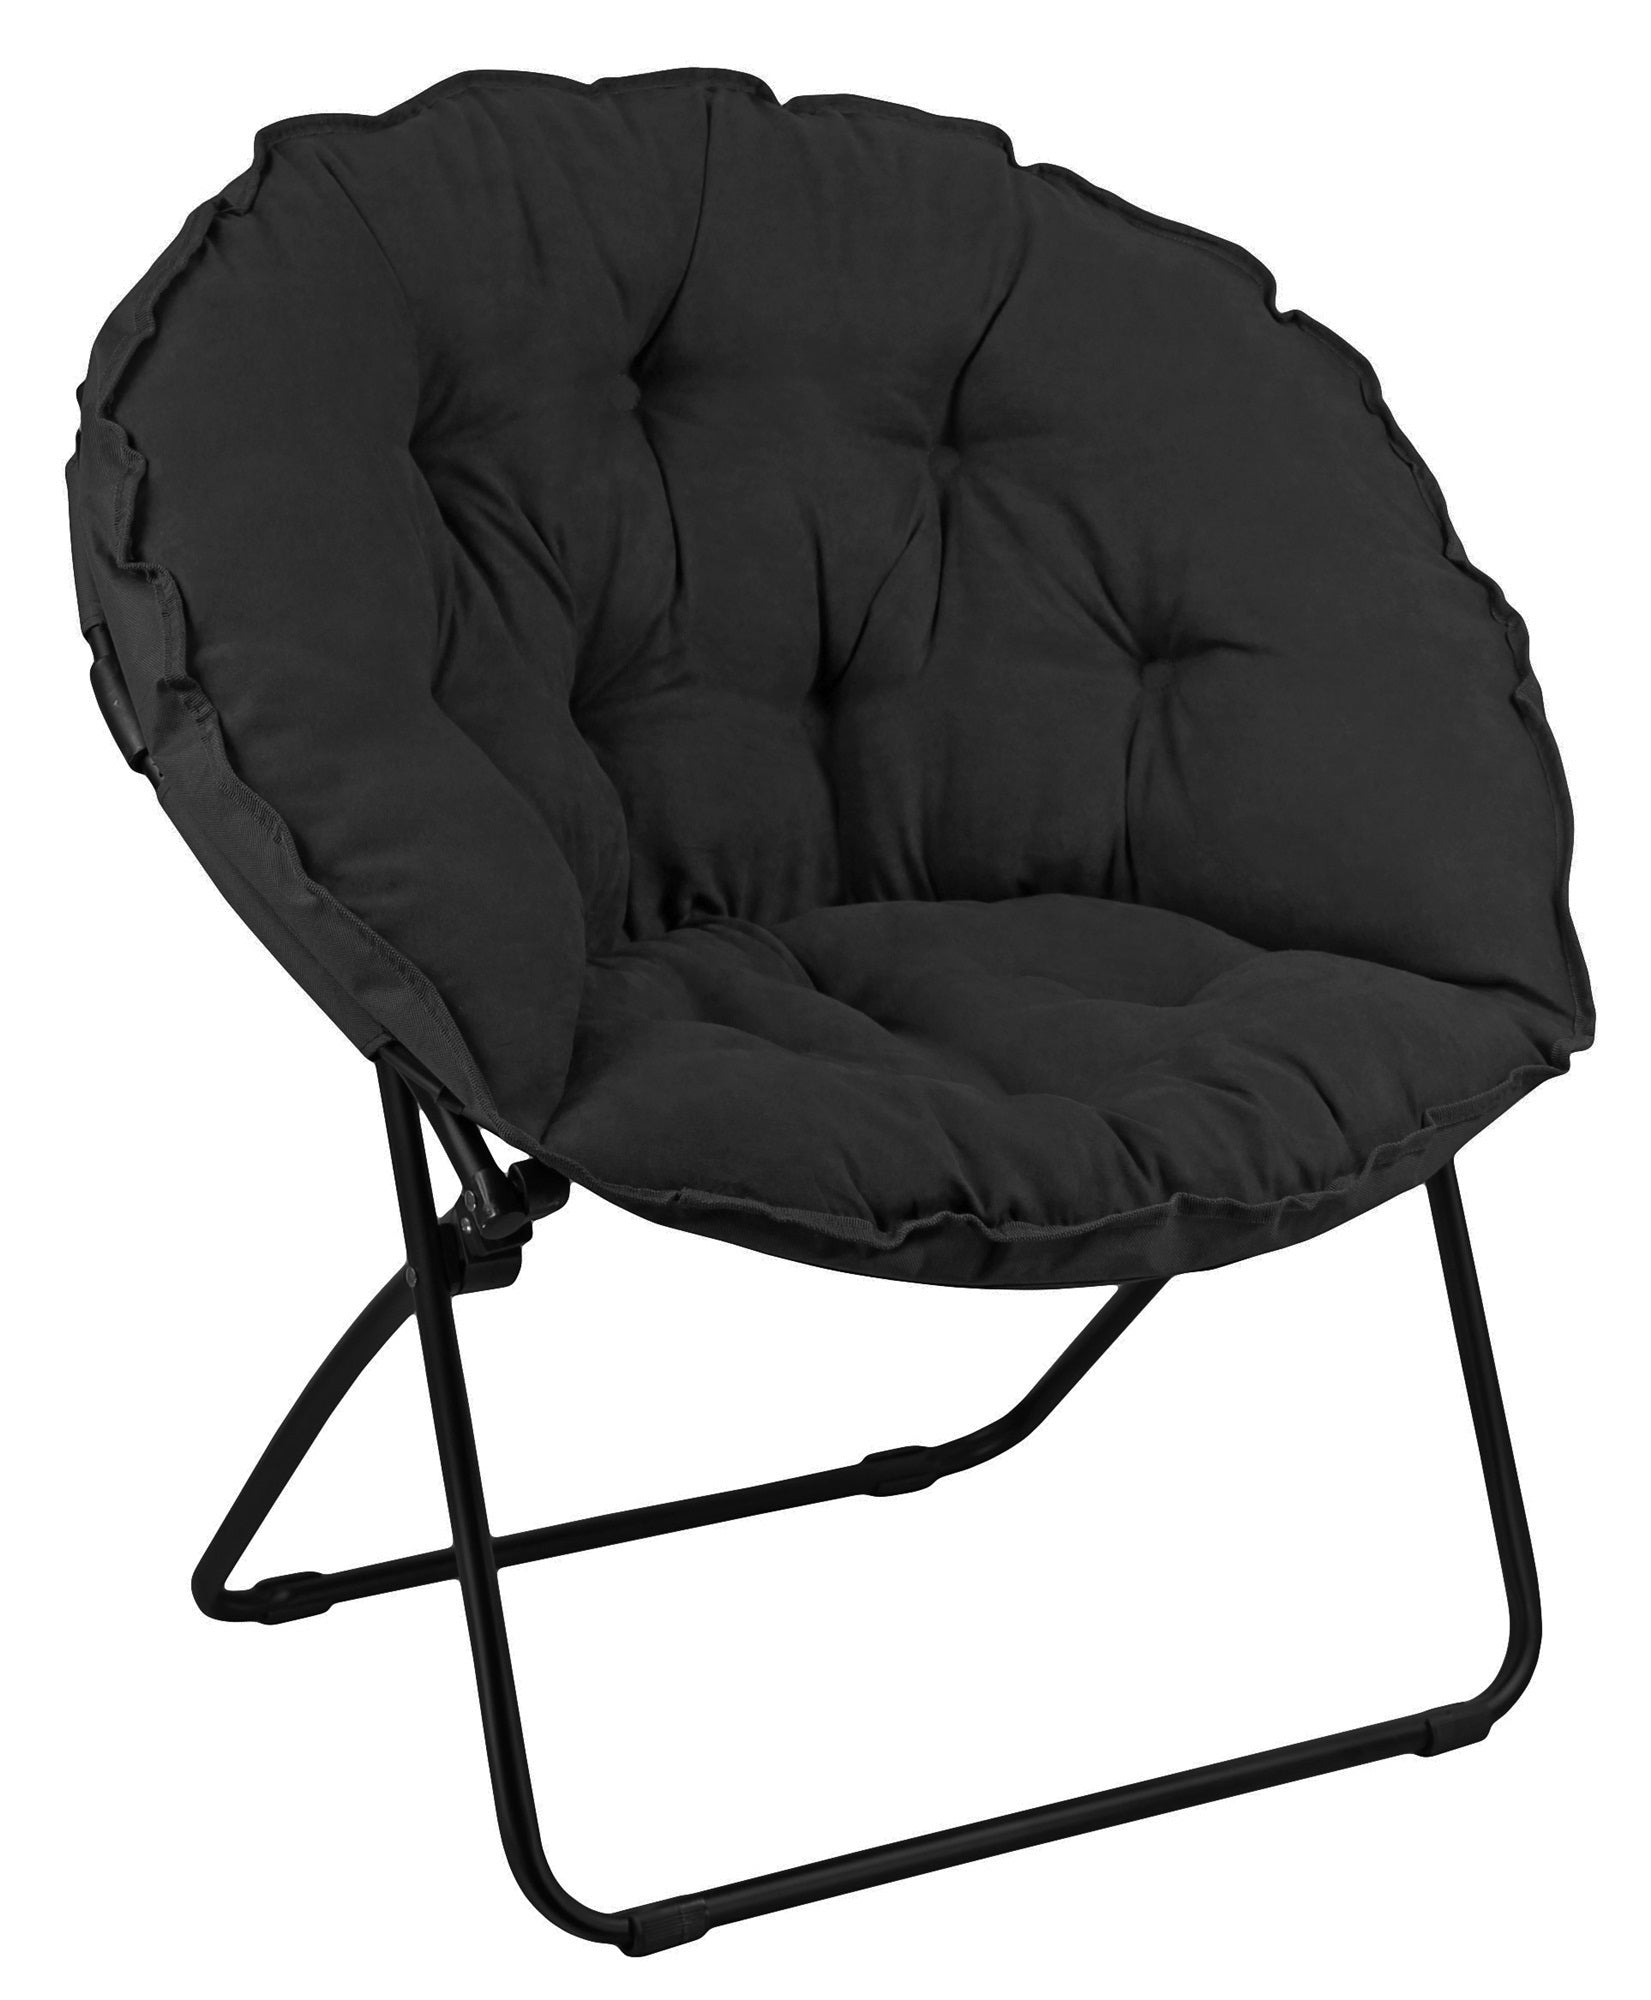 Zenithen Round Foldable Padded Dish/Saucer Chair For Game, Bed, or Living Room